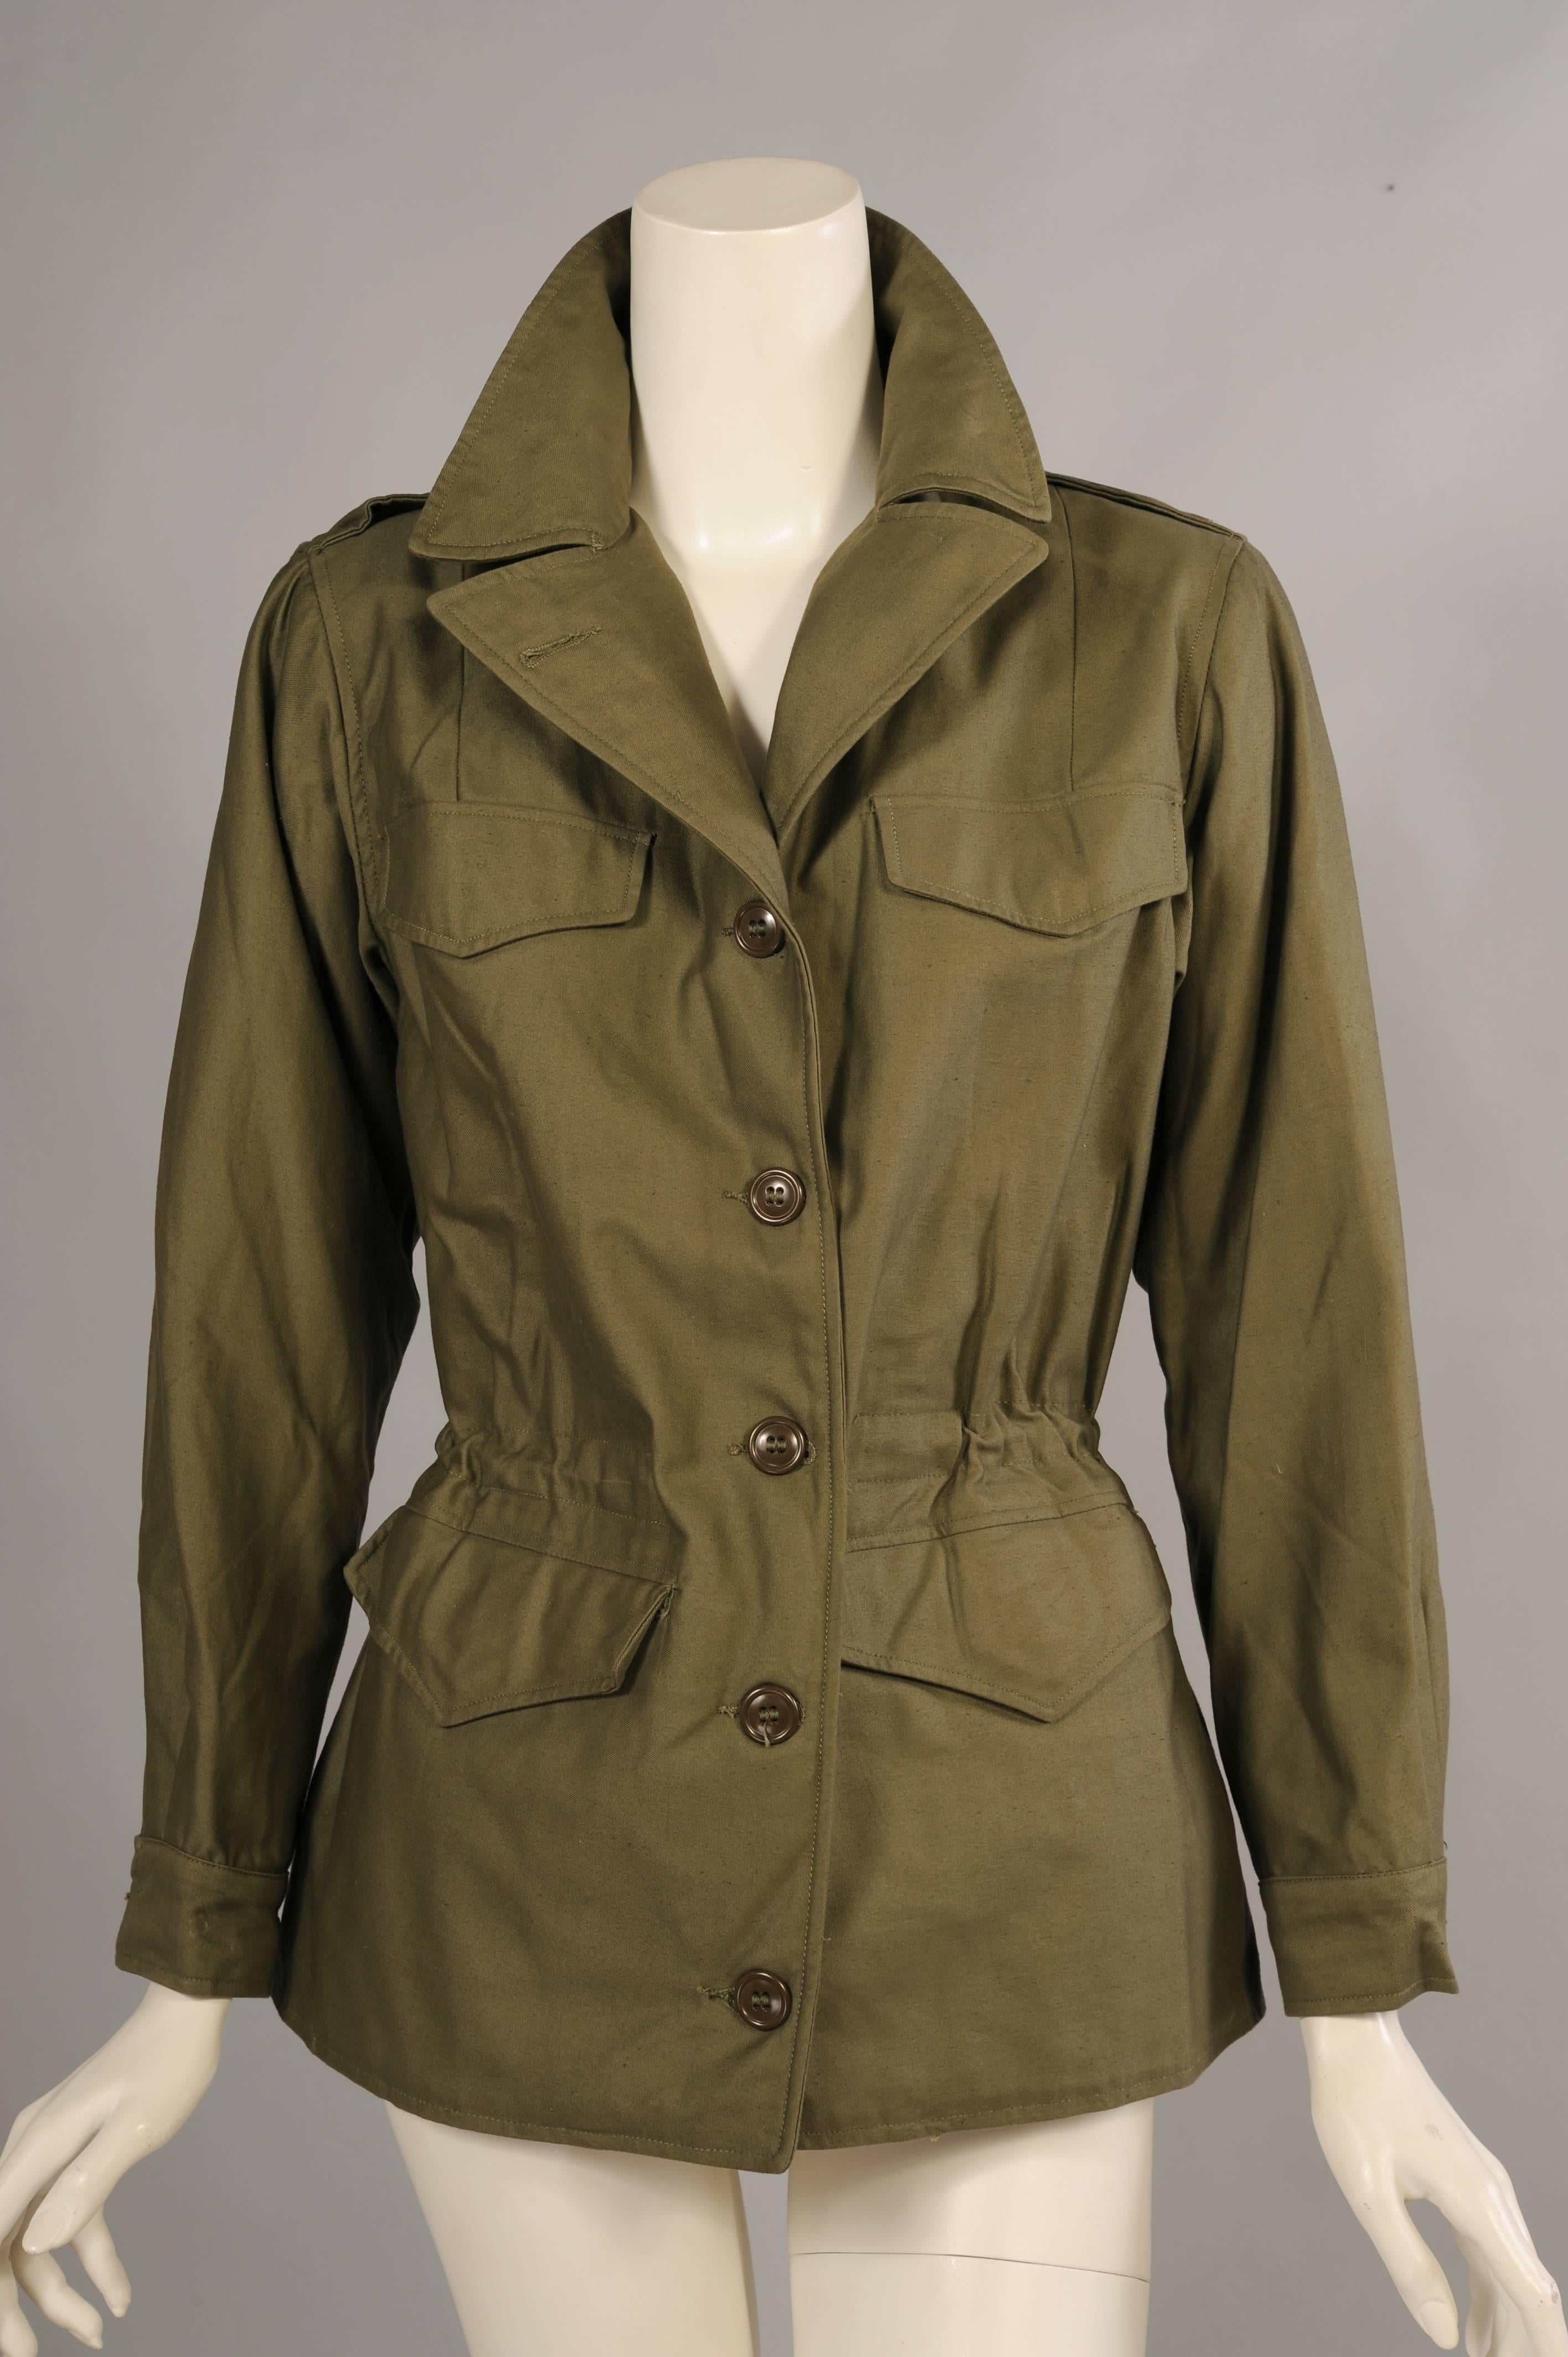 From the estate of a WWII Red Cross nurse, this olive drab jacket is beautifully designed and looks very contemporary. There are two faux breast pockets, two hip pockets with hidden button tabs and an interior drawstring to adjust the fit of the